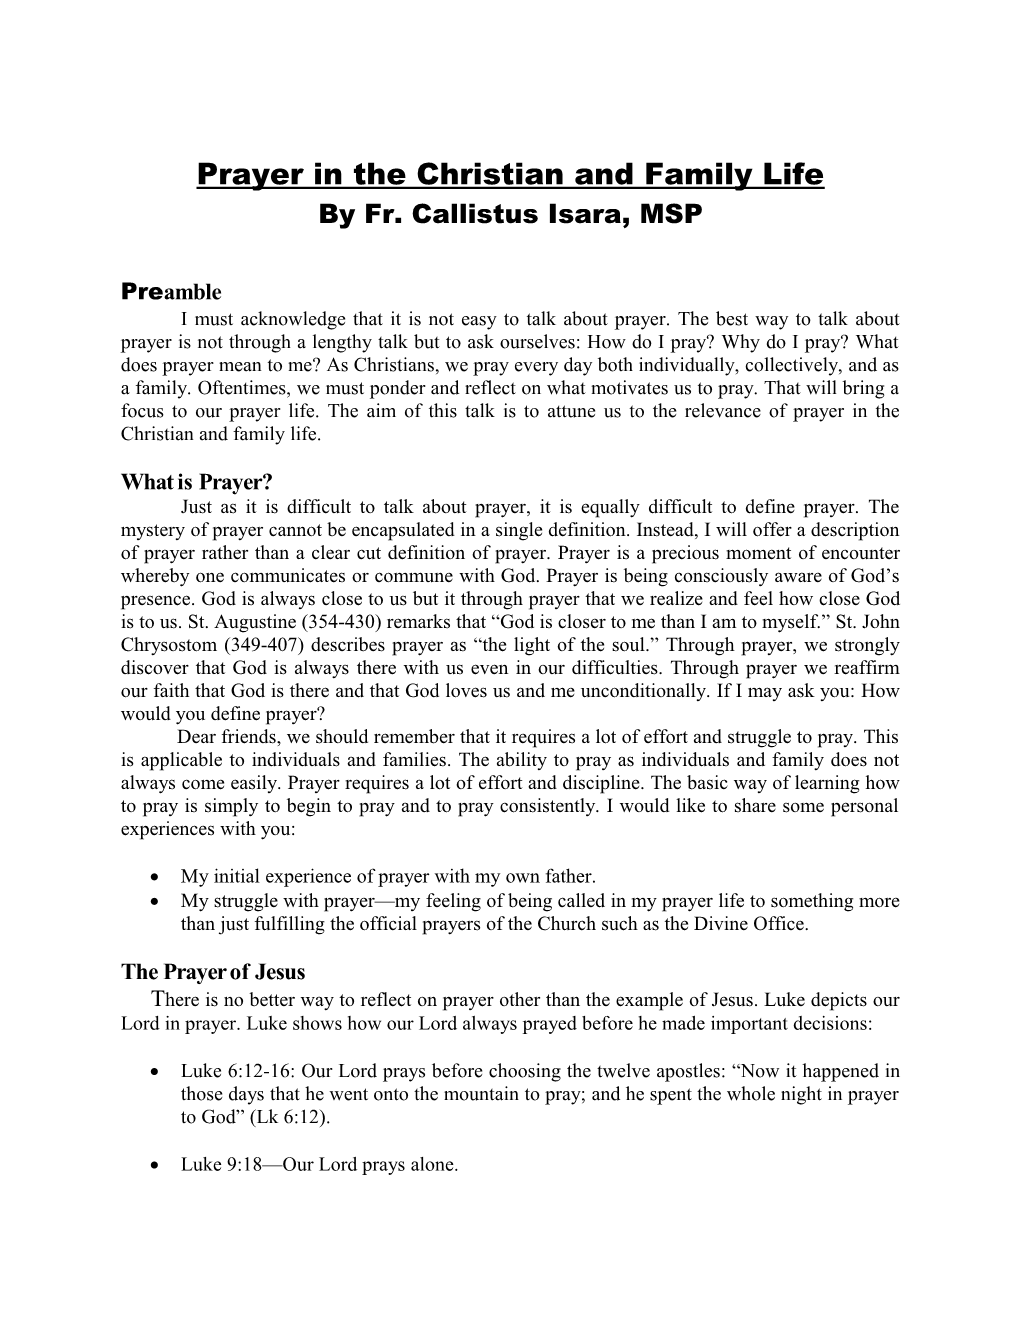 Prayer in the Christian and Family Life